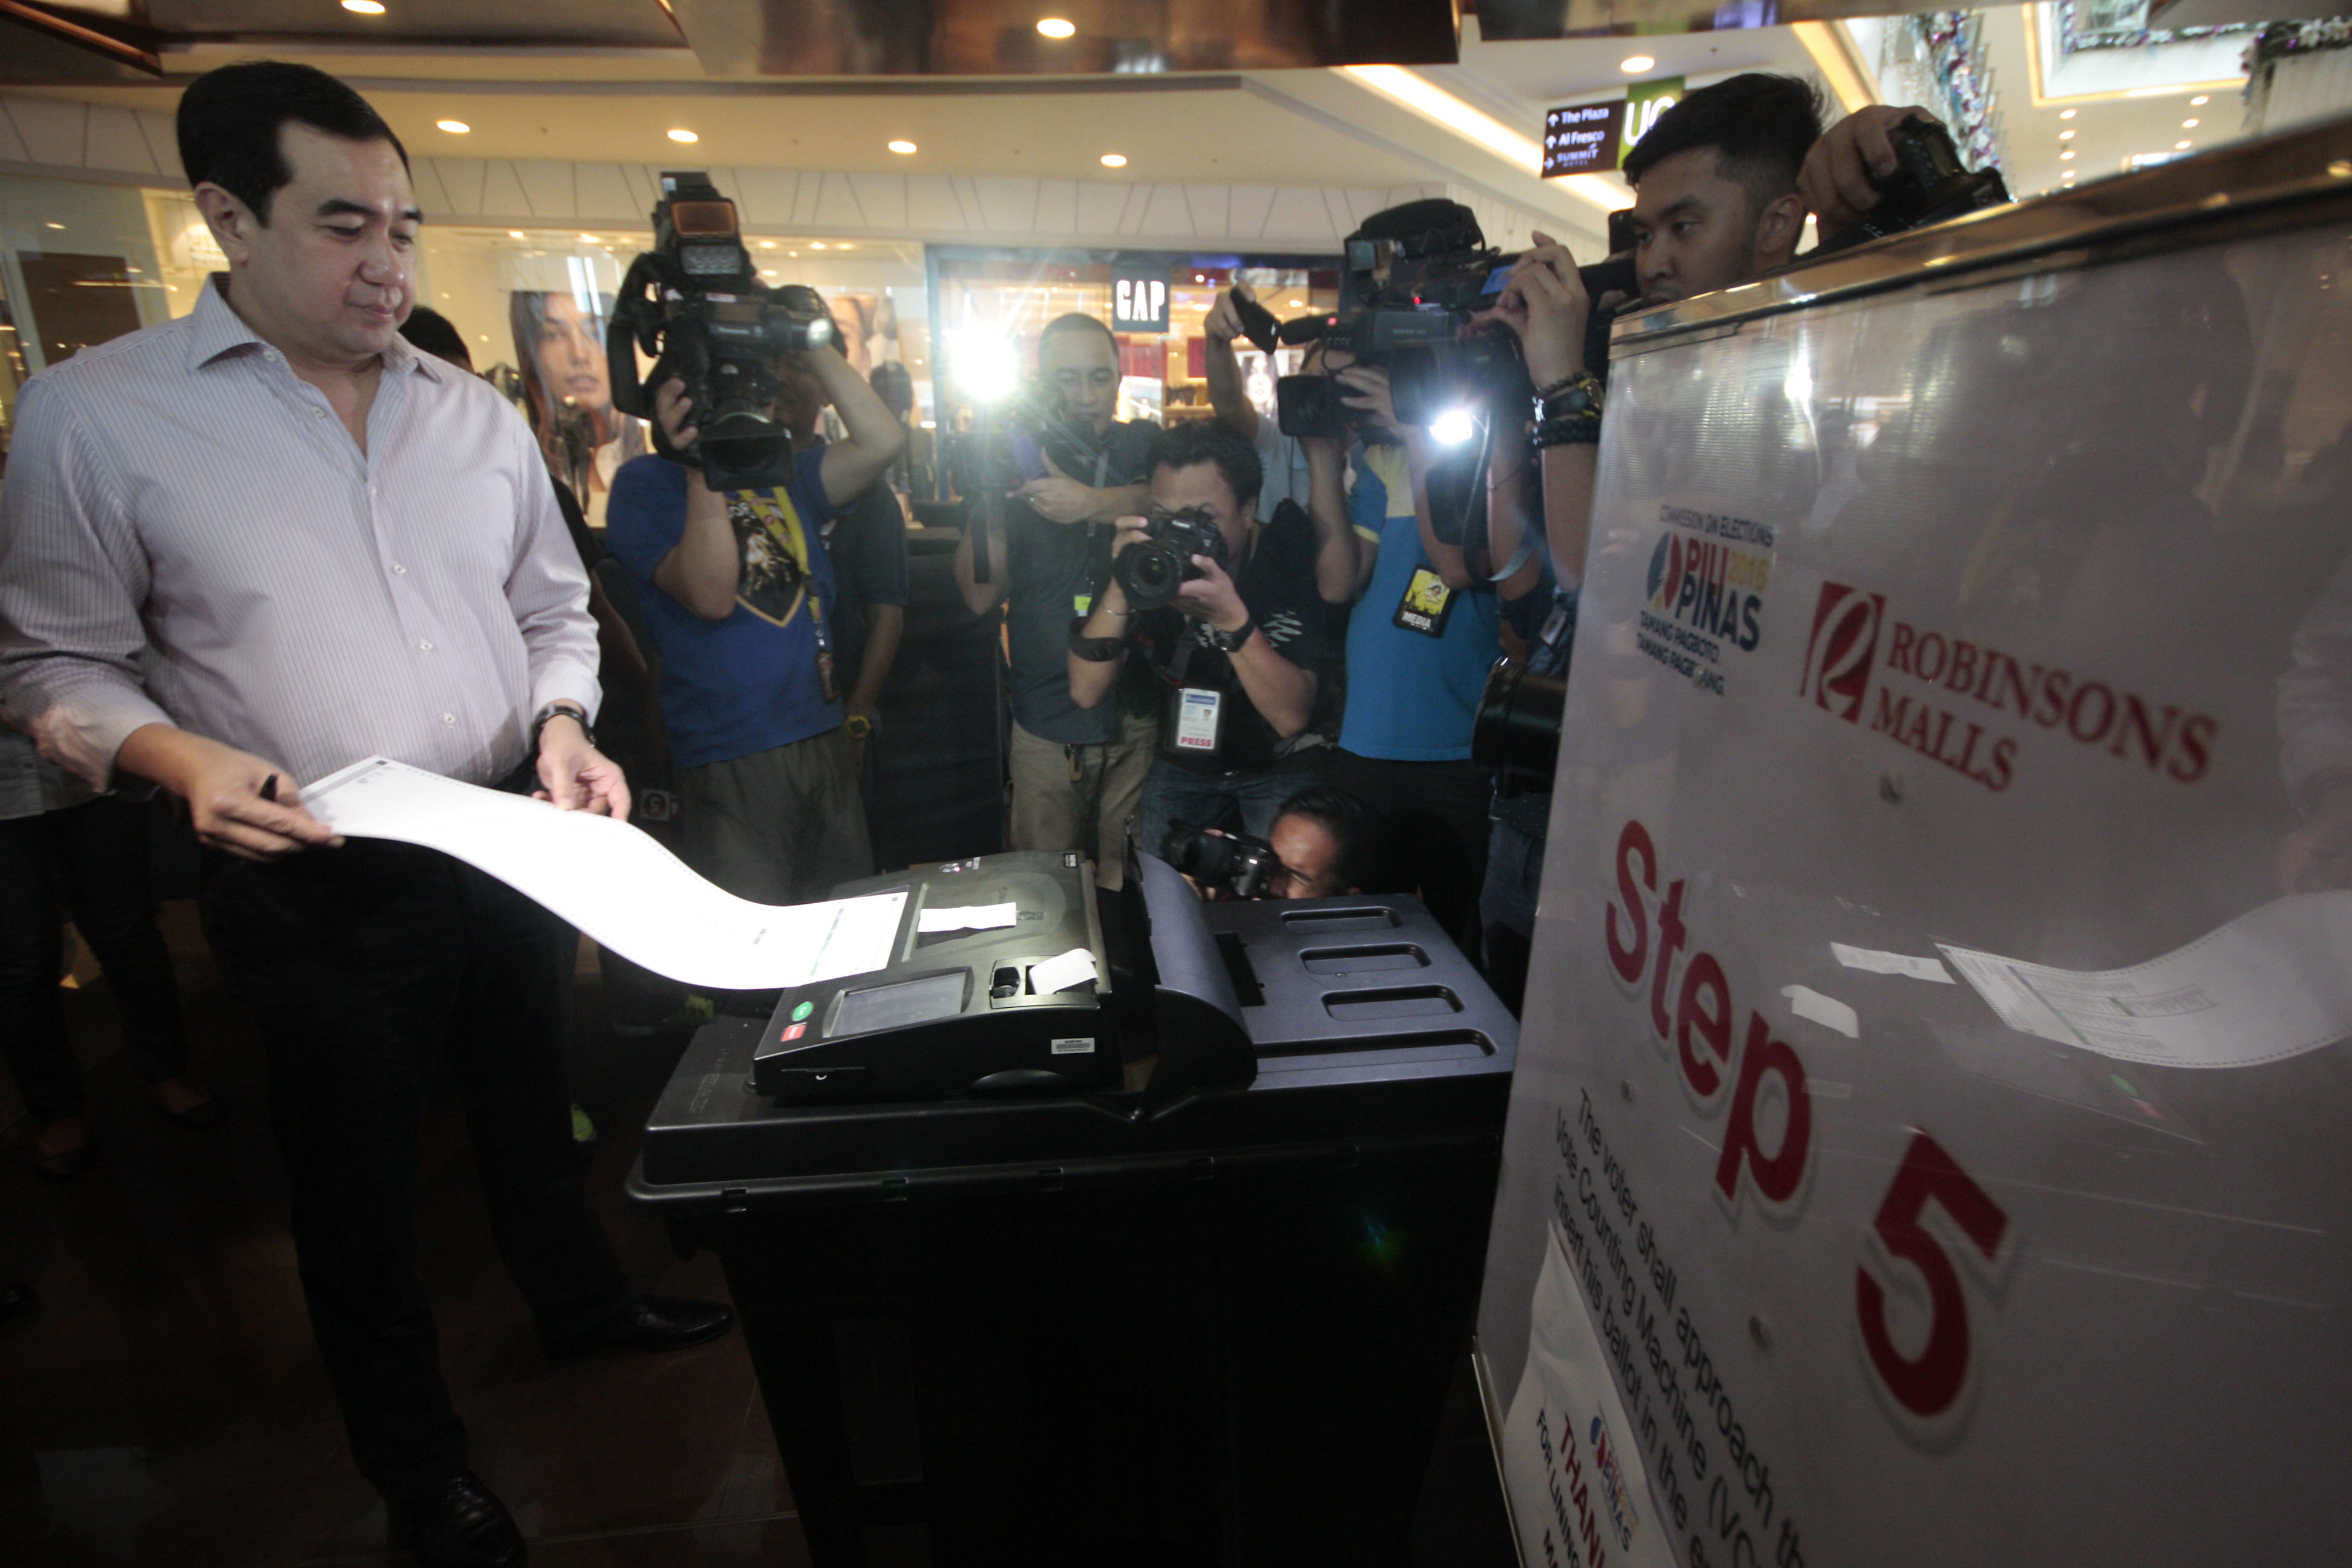 TESTING THE PROCESS. Comelec Chairman Andres Bautista uses a vote-counting machine as he demonstrates the voting procedure in a Metro Manila mall in October 2015. Photo by Ben Nabong/Rappler  